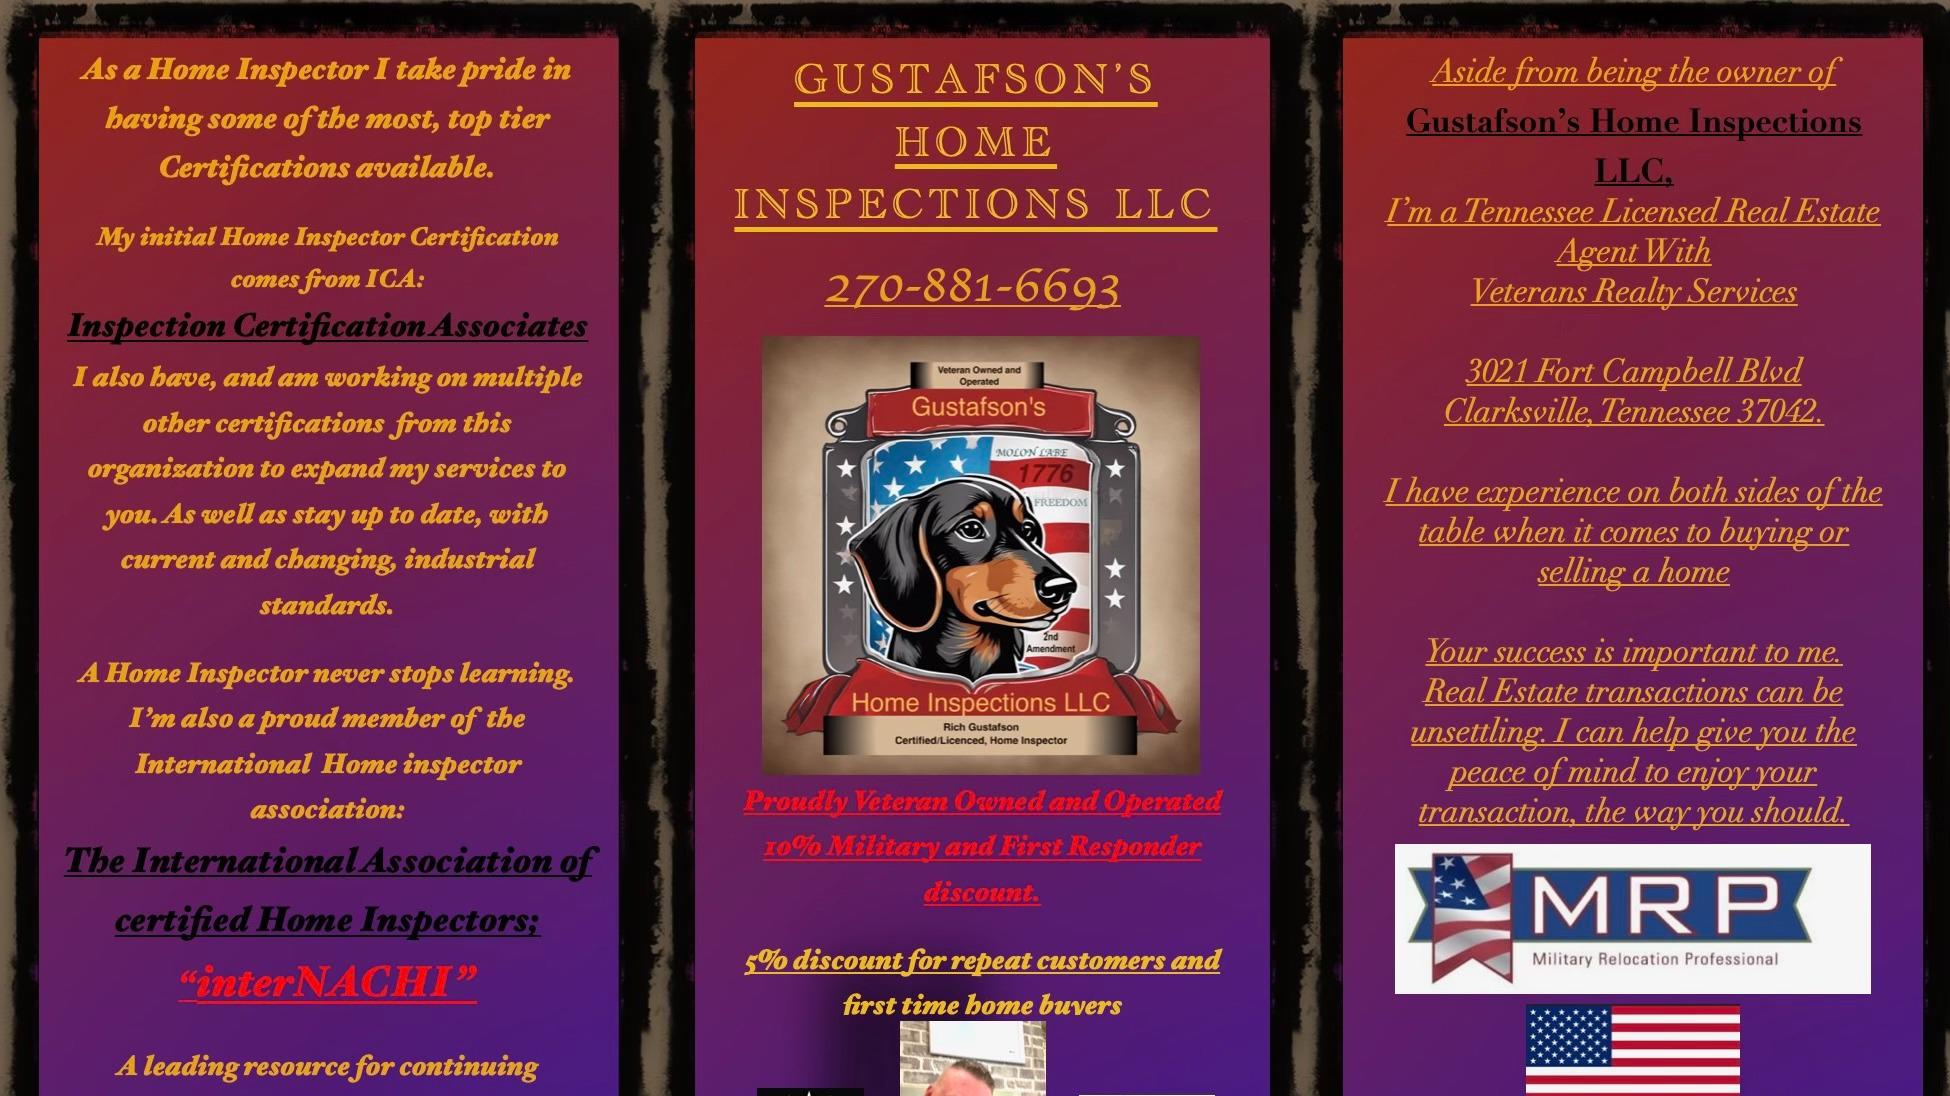 Gustafson's Home Inspections is a reputable home inspection company dedicated to providing exceptional service and unmatched expertise. As the sole proprietor, I bring years of experience and a commitment to excellence to every inspection, ensuring that each client receives a thorough and accurate assessment of their property. With a focus on professionalism and integrity, I strive to exceed expectations and uphold our reputation as a trusted partner in the home buying and selling process.